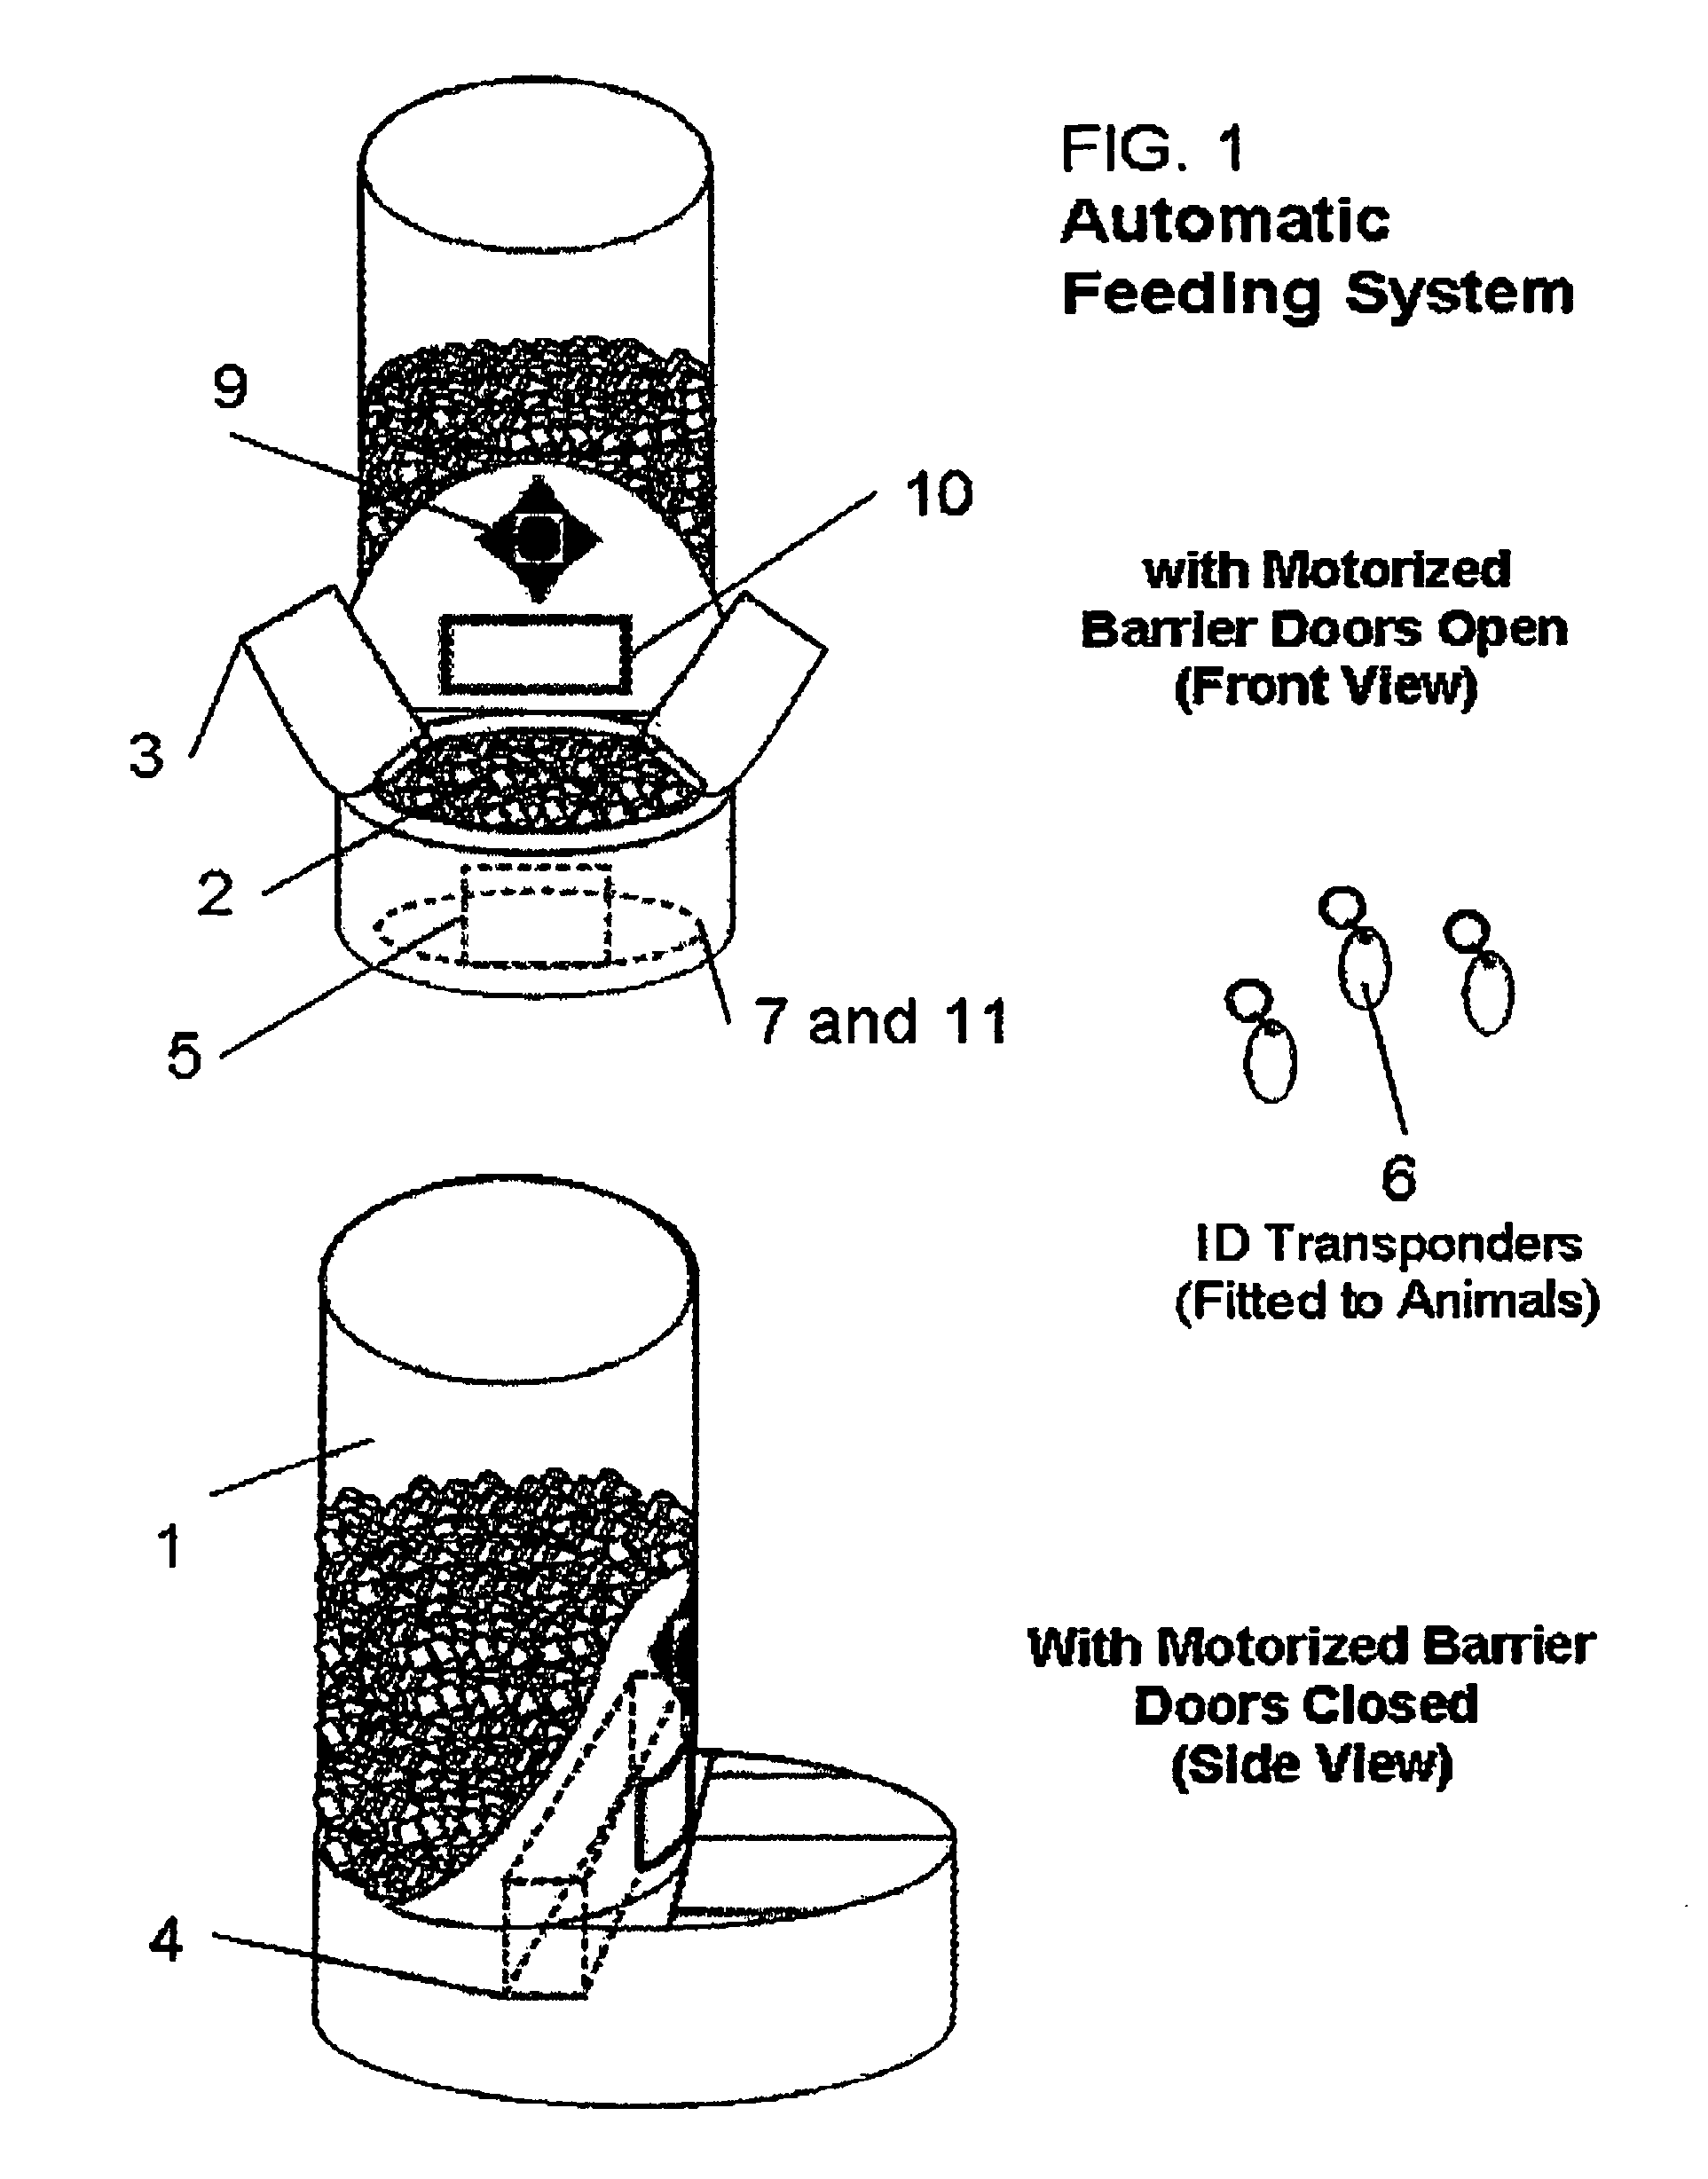 Automatic feeding system, device and method